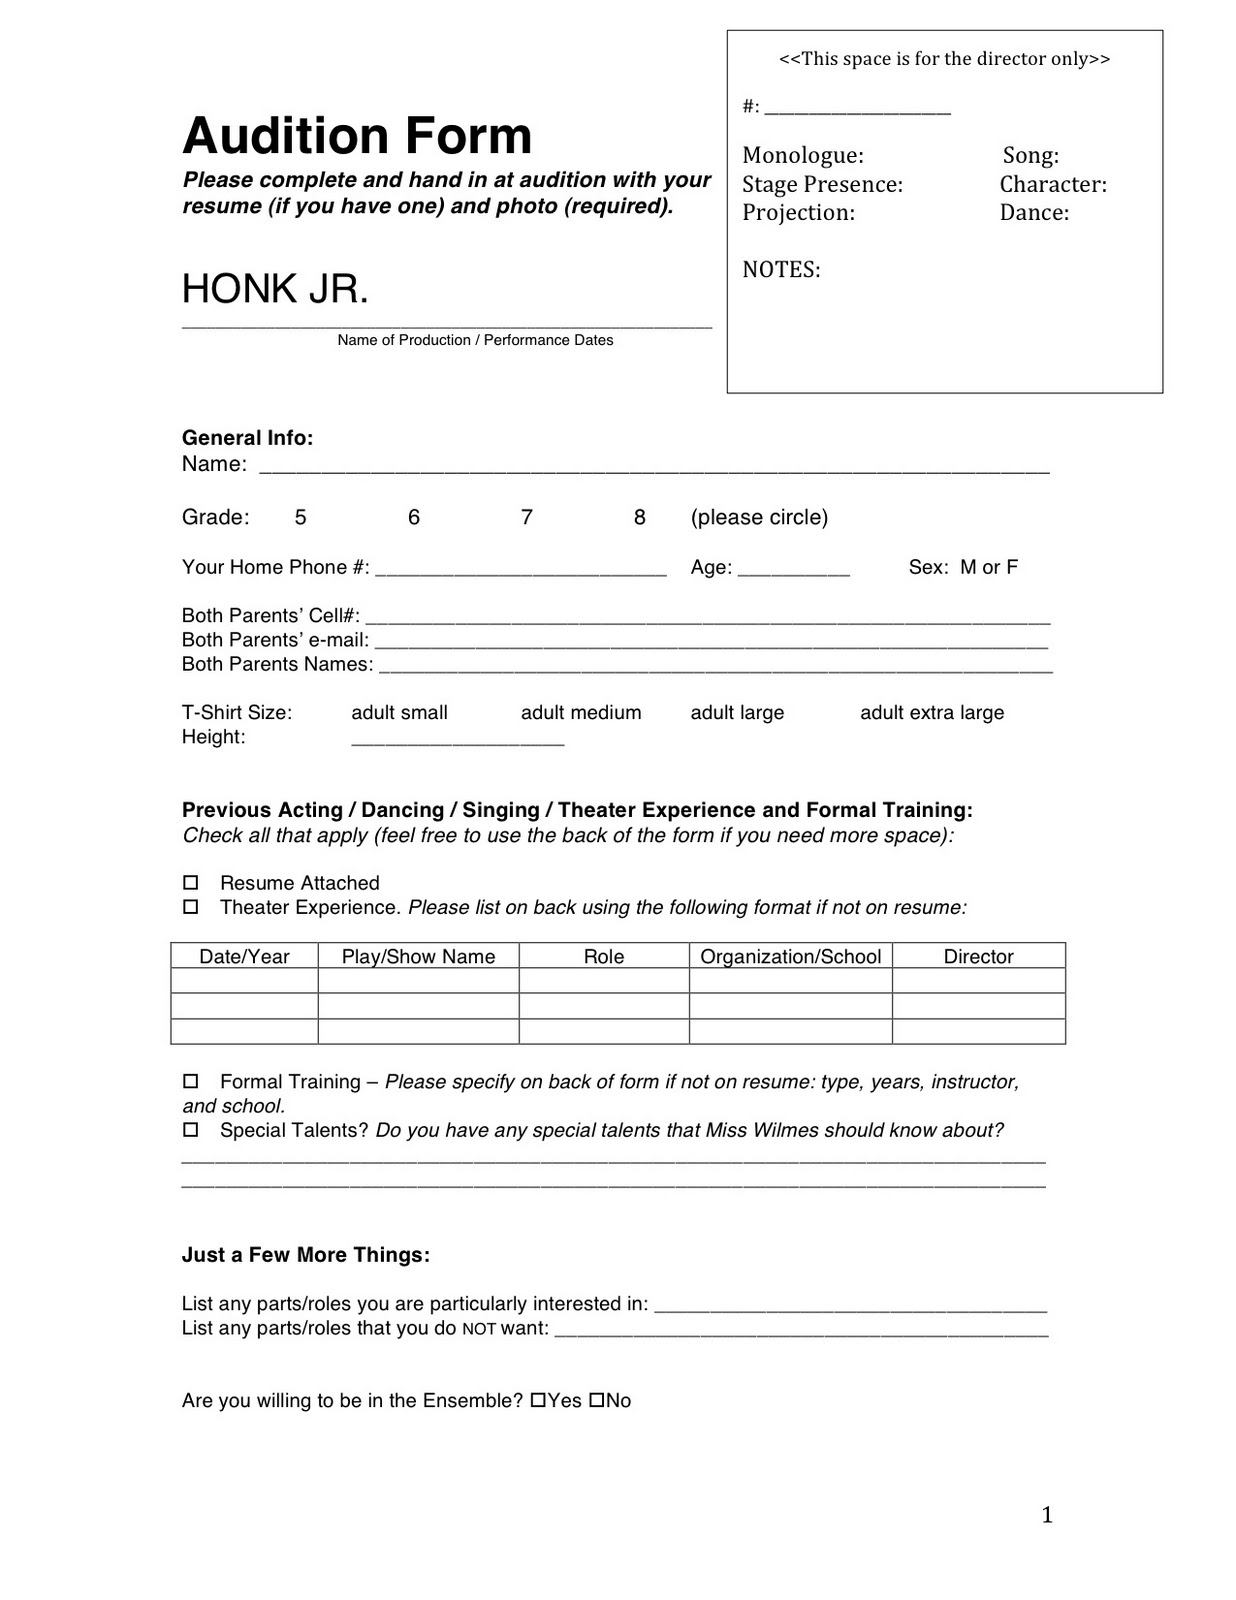 wyoming-middle-school-theater-spring-musical-audition-form